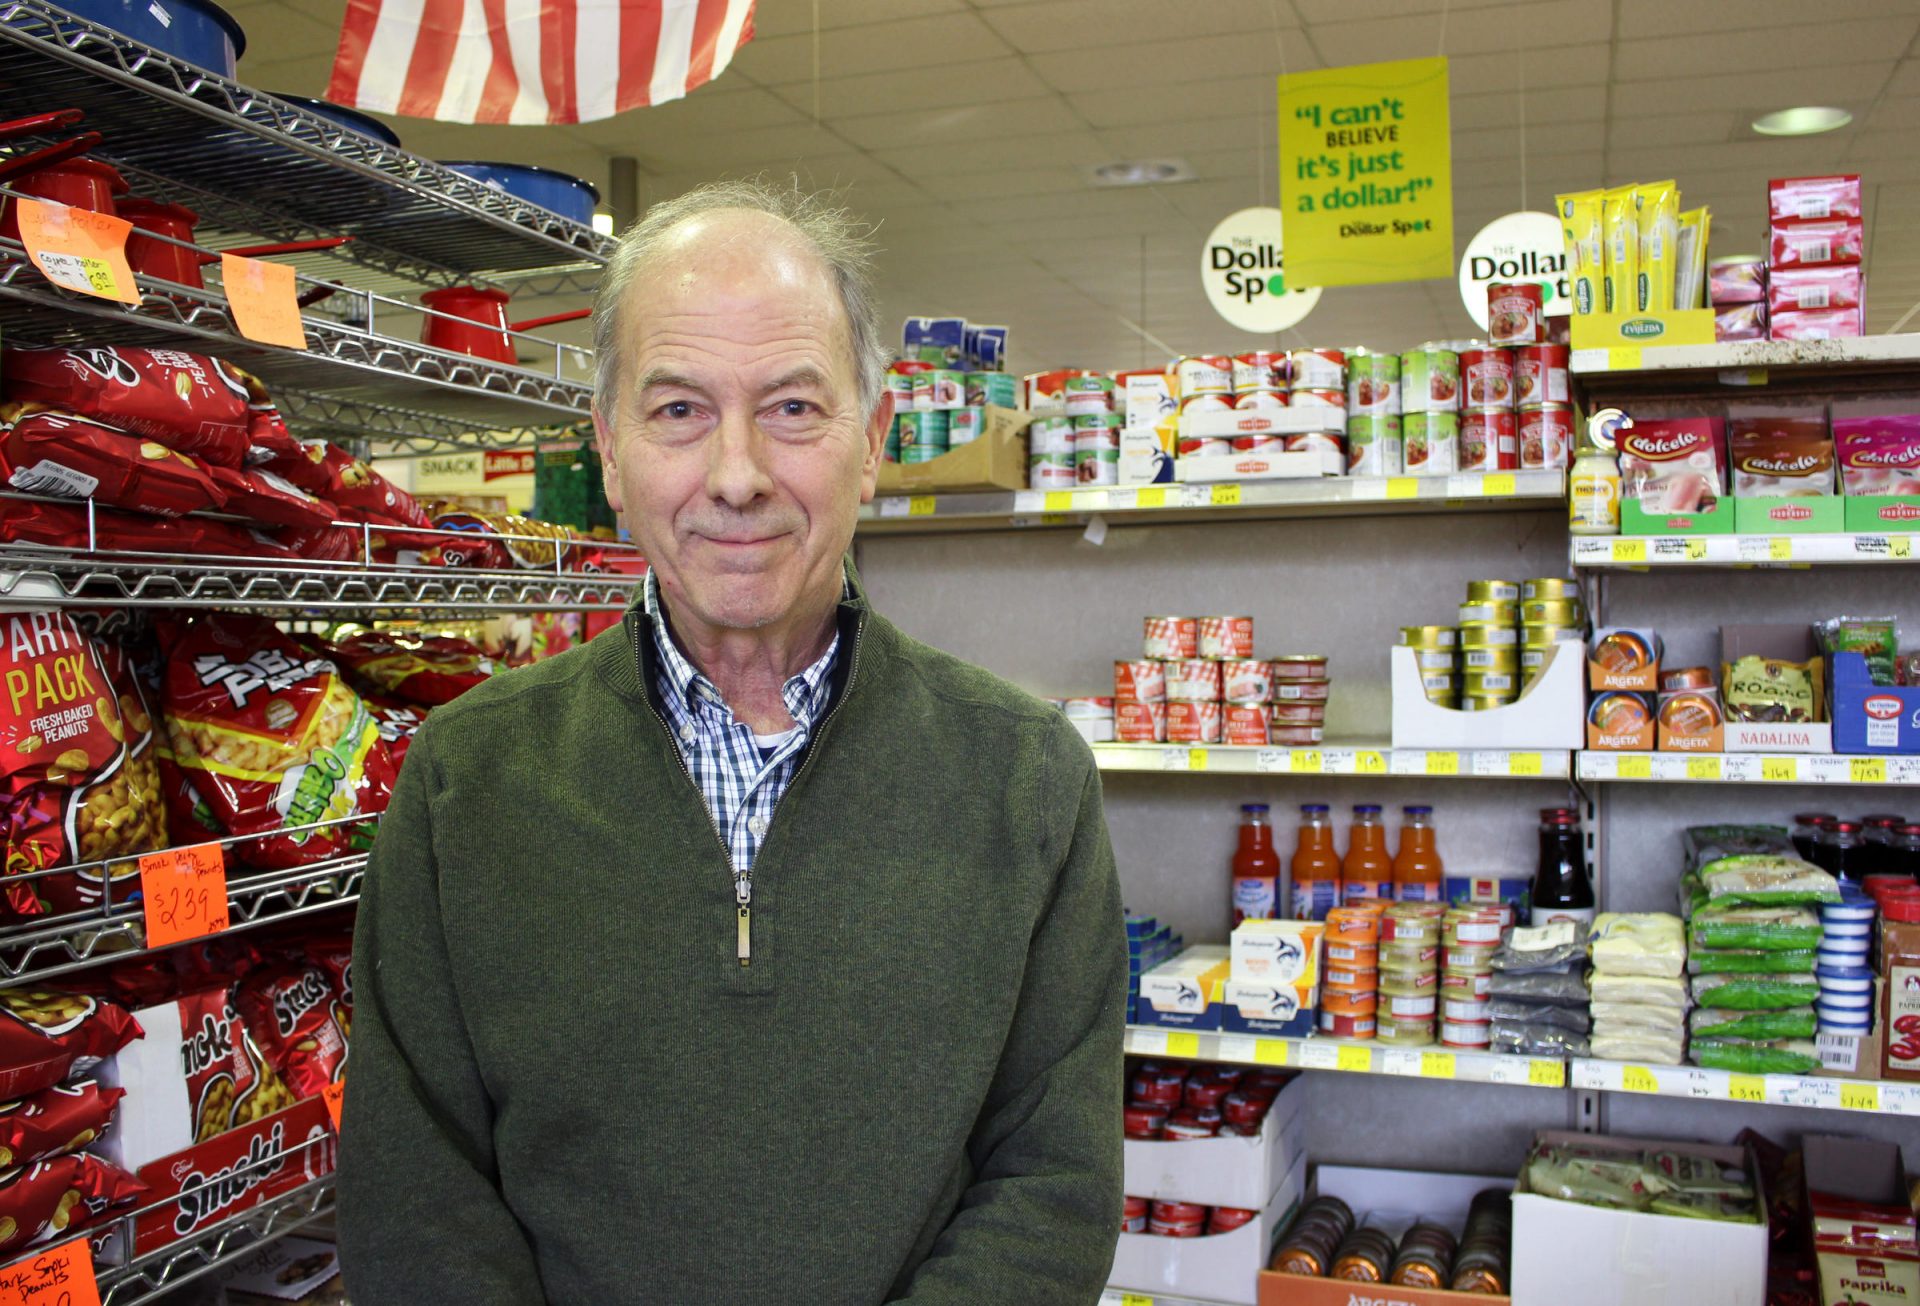 Bill Mehlinger stocked his grocery store to accommodate refugees moving to town. He and his wife would call foreign embassies to learn what products to buy.